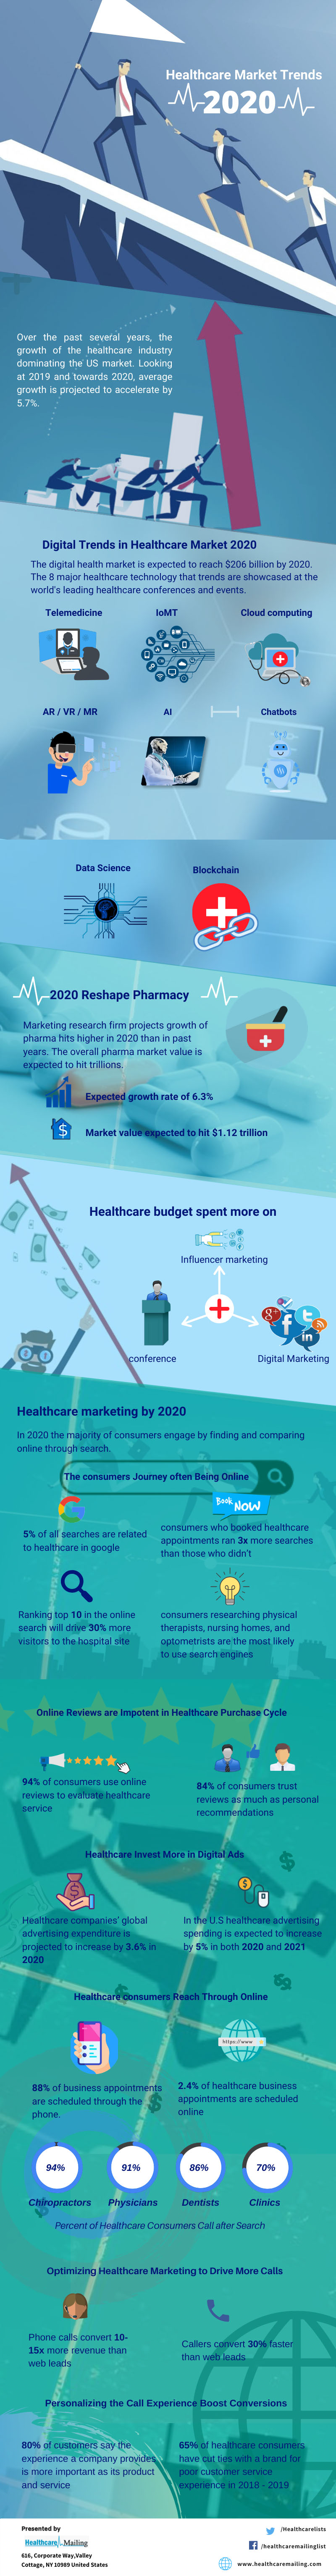 healthcare-market-trends-for-2020